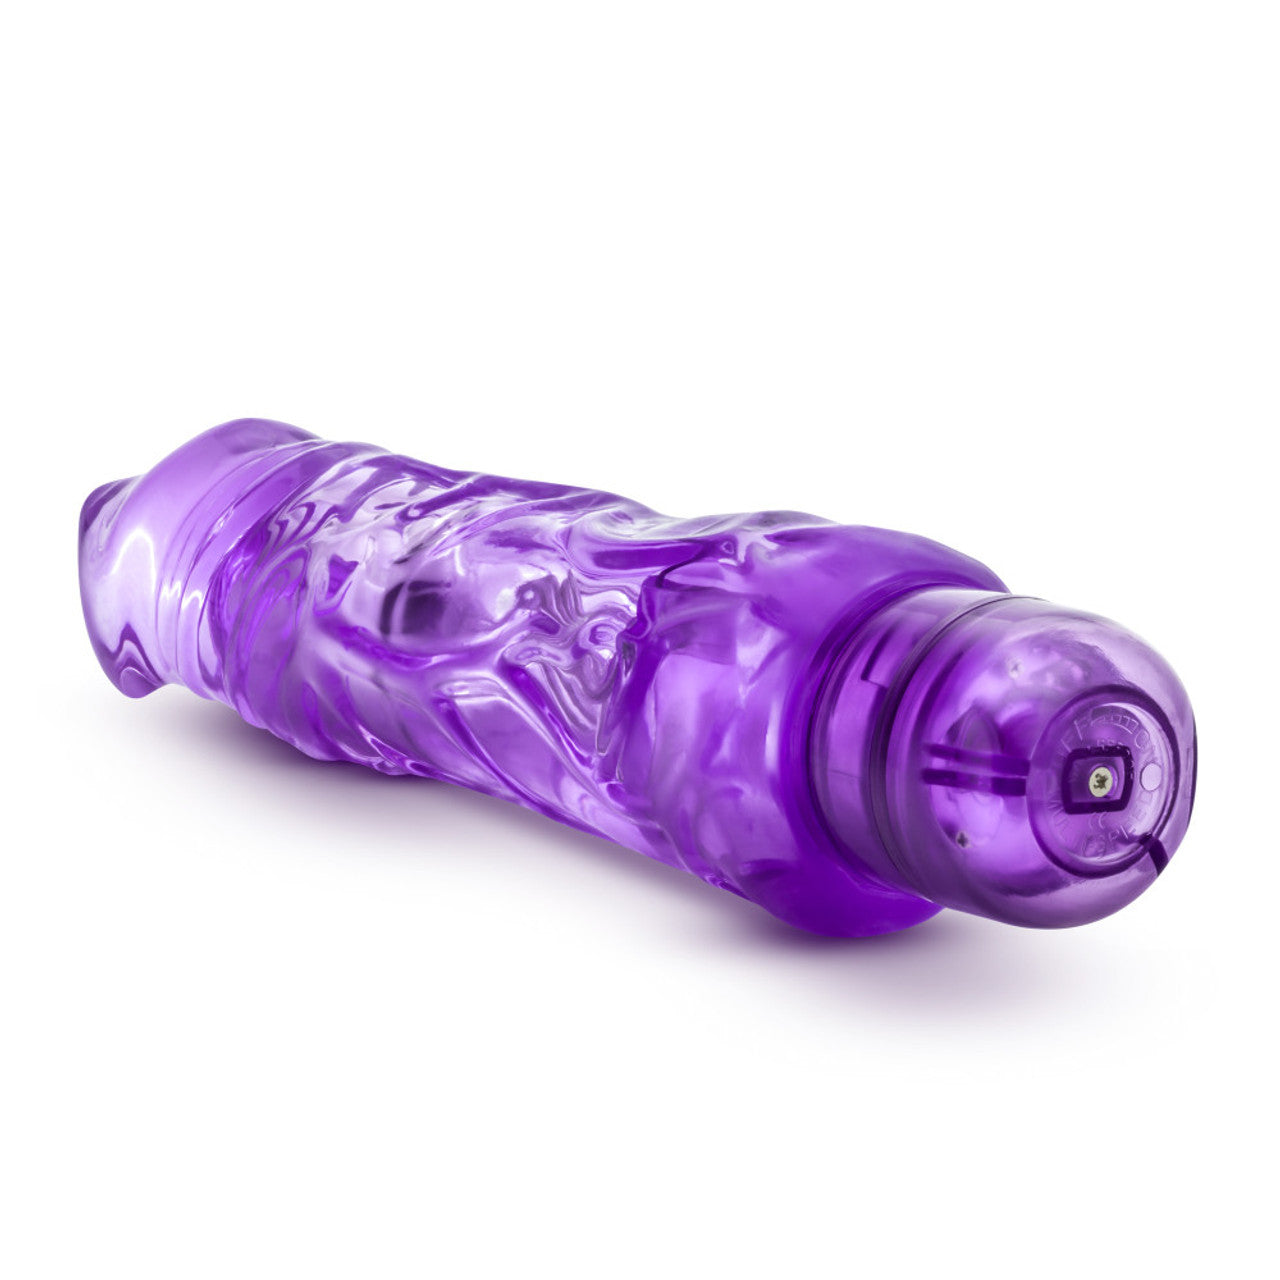 Naturally Yours Wild Ride Vibrating Dildo - Purple - Thorn & Feather